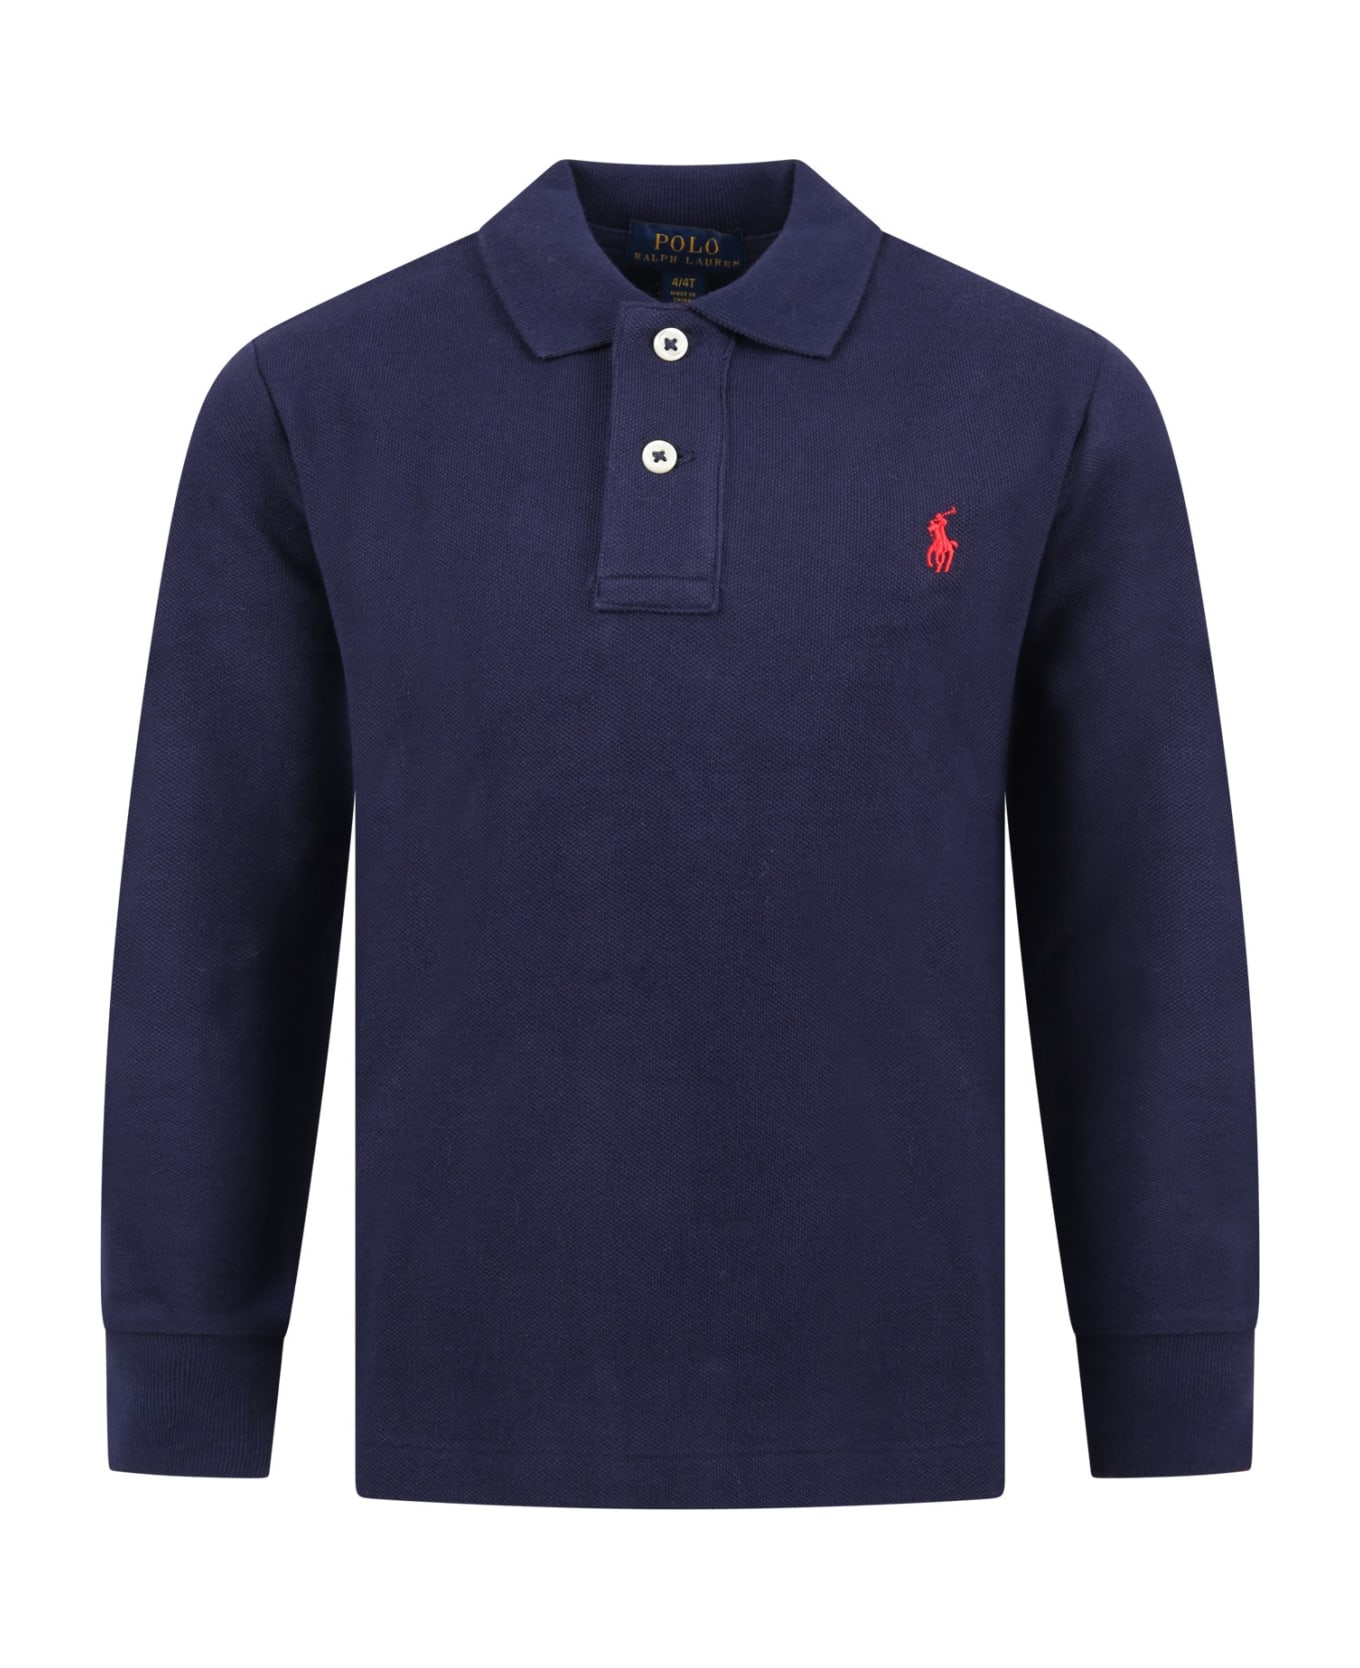 Ralph Lauren Blue Polo Shiirt For Boy With Iconic Pony - Blue